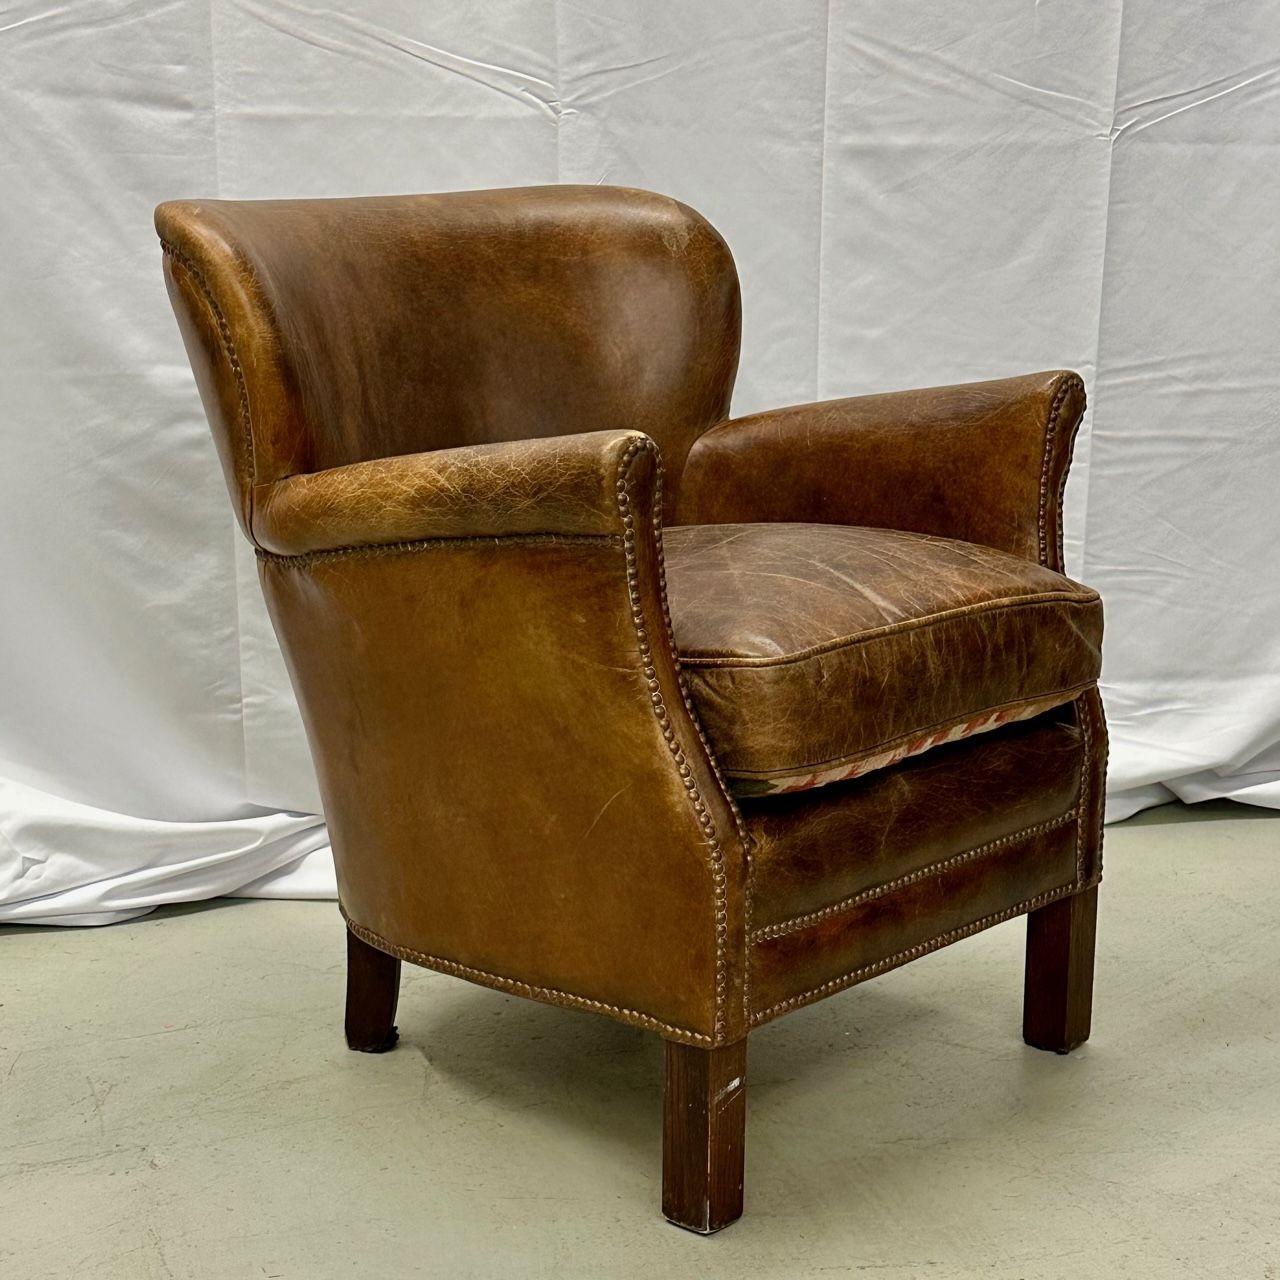 Pair of Petite Distressed Leather Club / Lounge / Arm Chairs, Danish Style 2